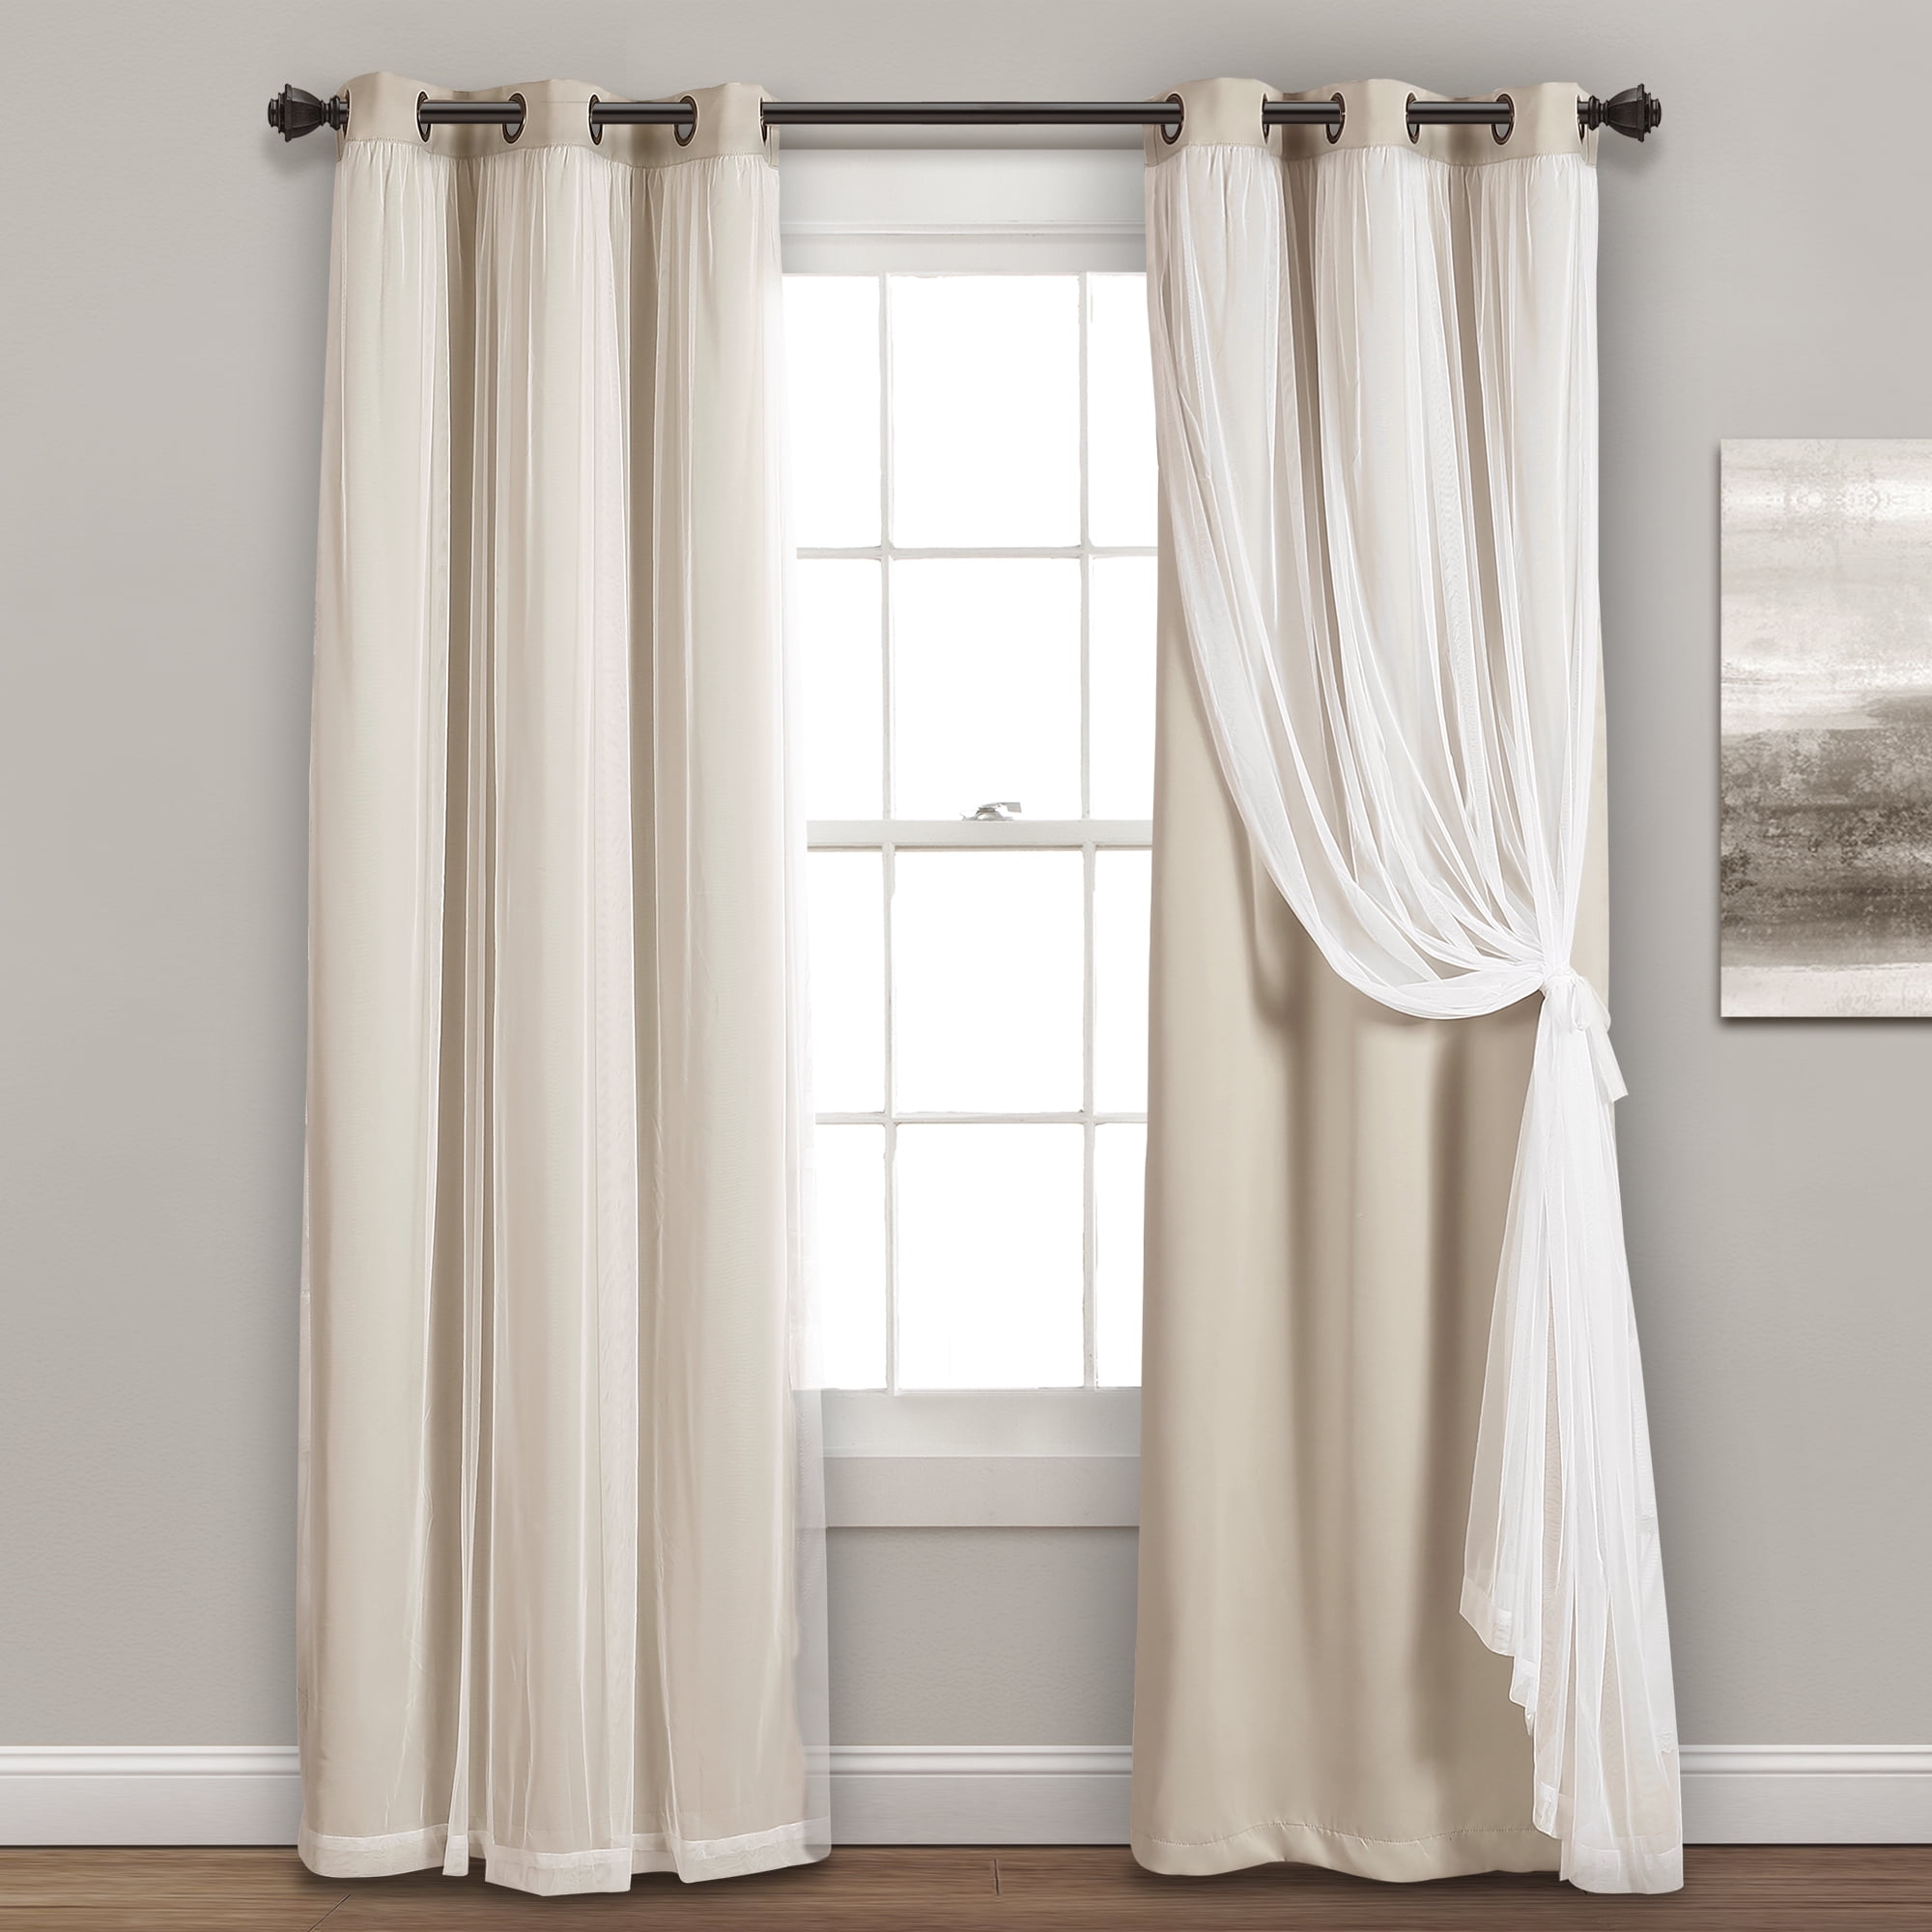 Details about   2 PCS Thermal Insulated Blackout Curtain Liner 100% Blackout Liner for Window 